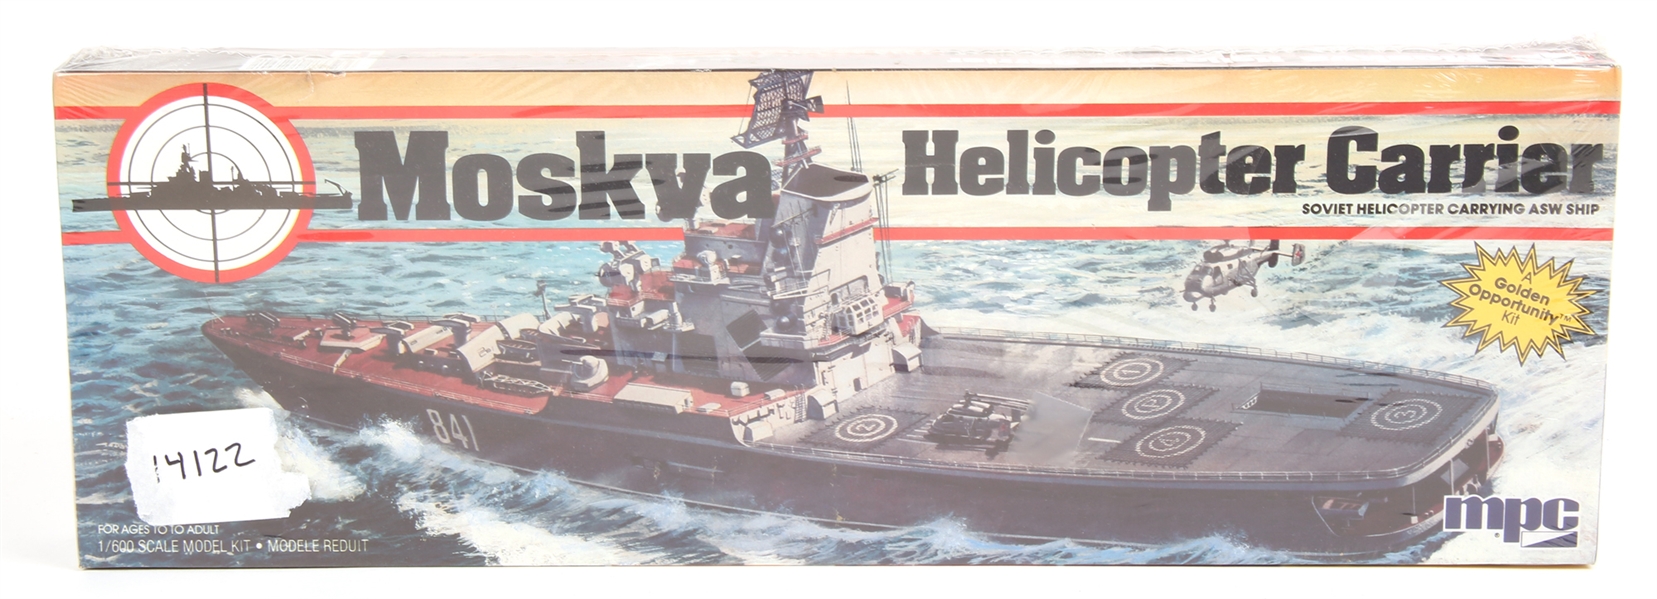 MOSKVA HELICOPTER CARRIER 1/600 SCALE MODEL KIT